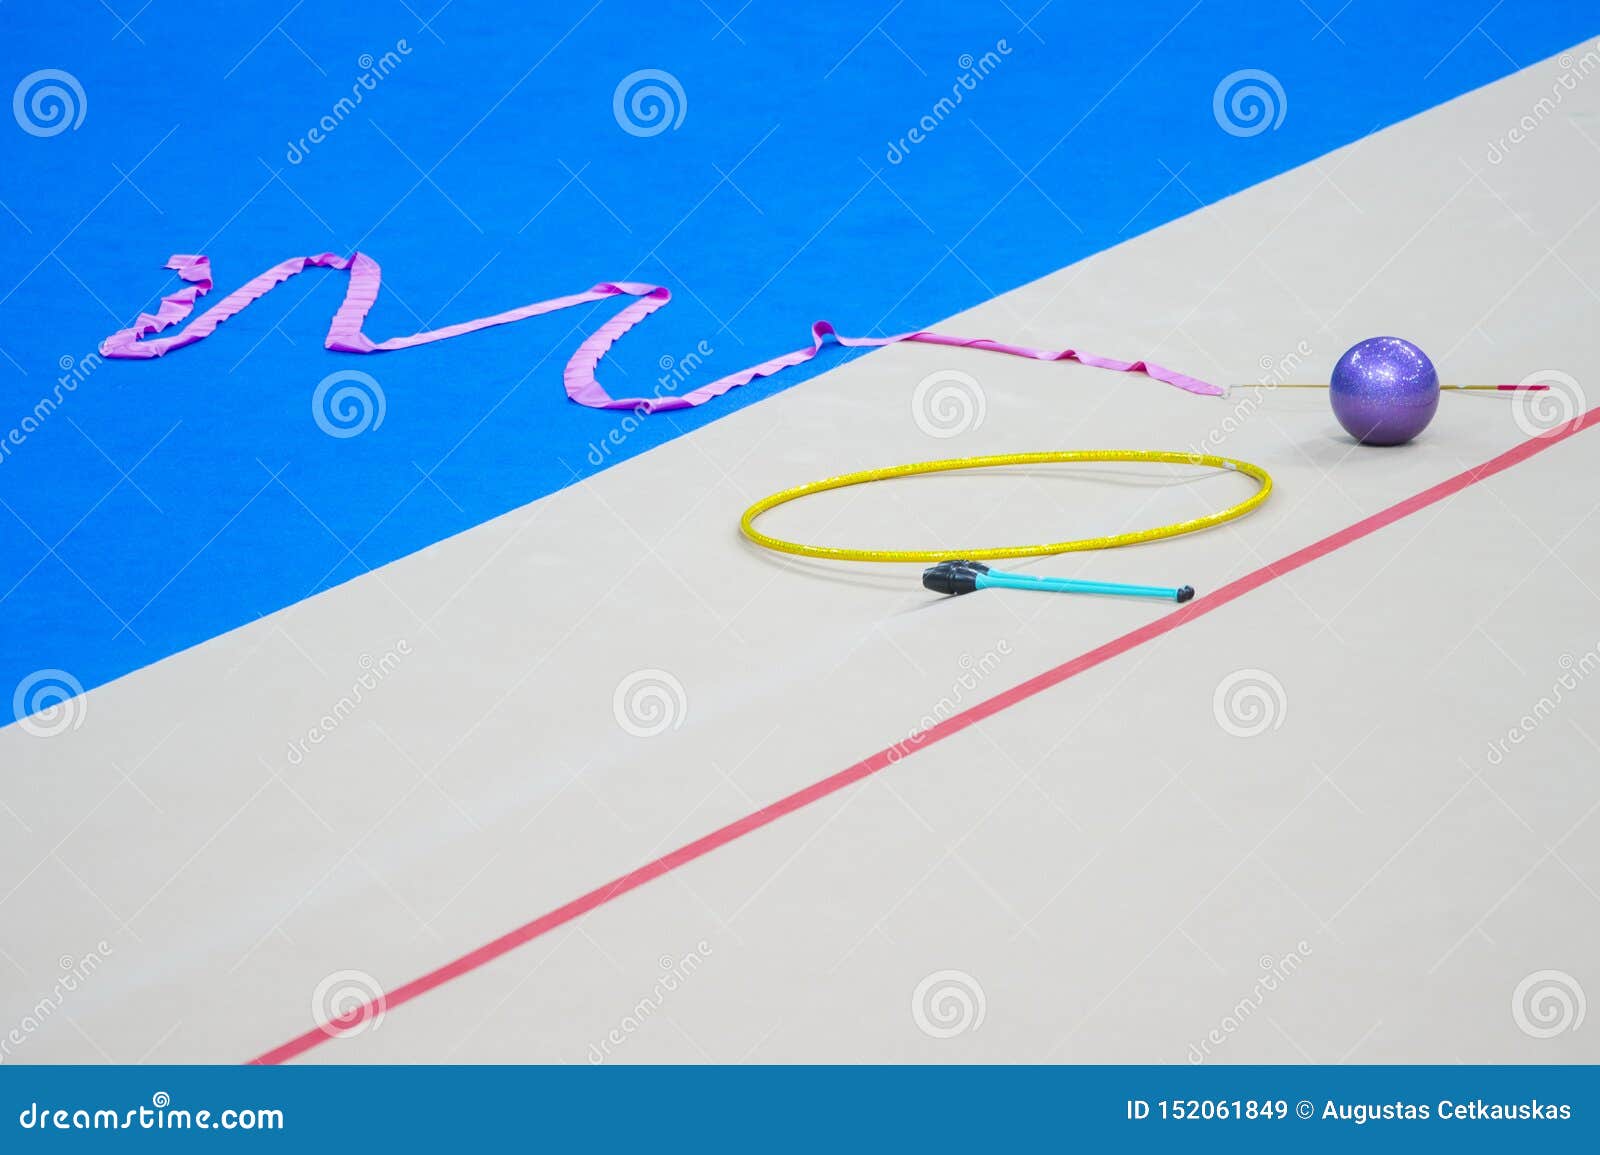 Sports Equipment for Rhythmic Gymnastics Lie on the Edge of the Carpet in  the Gym. Rhythmic Gymnastics Clubs, a Ball, a Hoop Stock Image - Image of  body, girl: 152061849